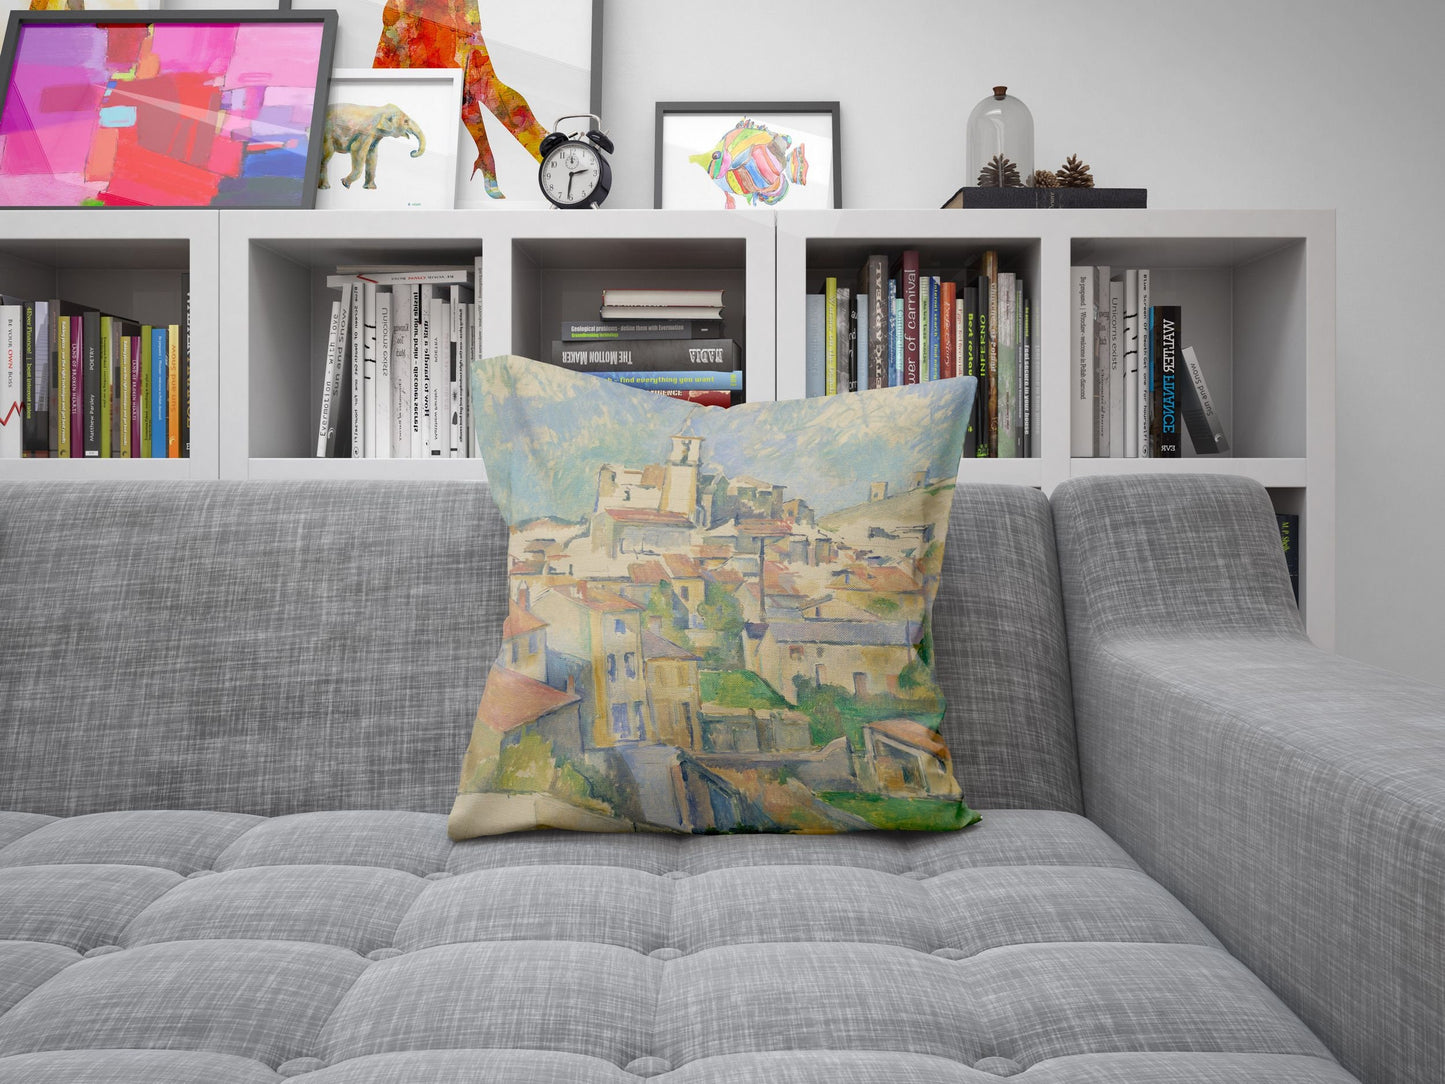 Paul Cezanne Famous Painting, Throw Pillow, Abstract Throw Pillow Cover, Designer Pillow, Blue And Beige, Modern Pillow, Square Pillow